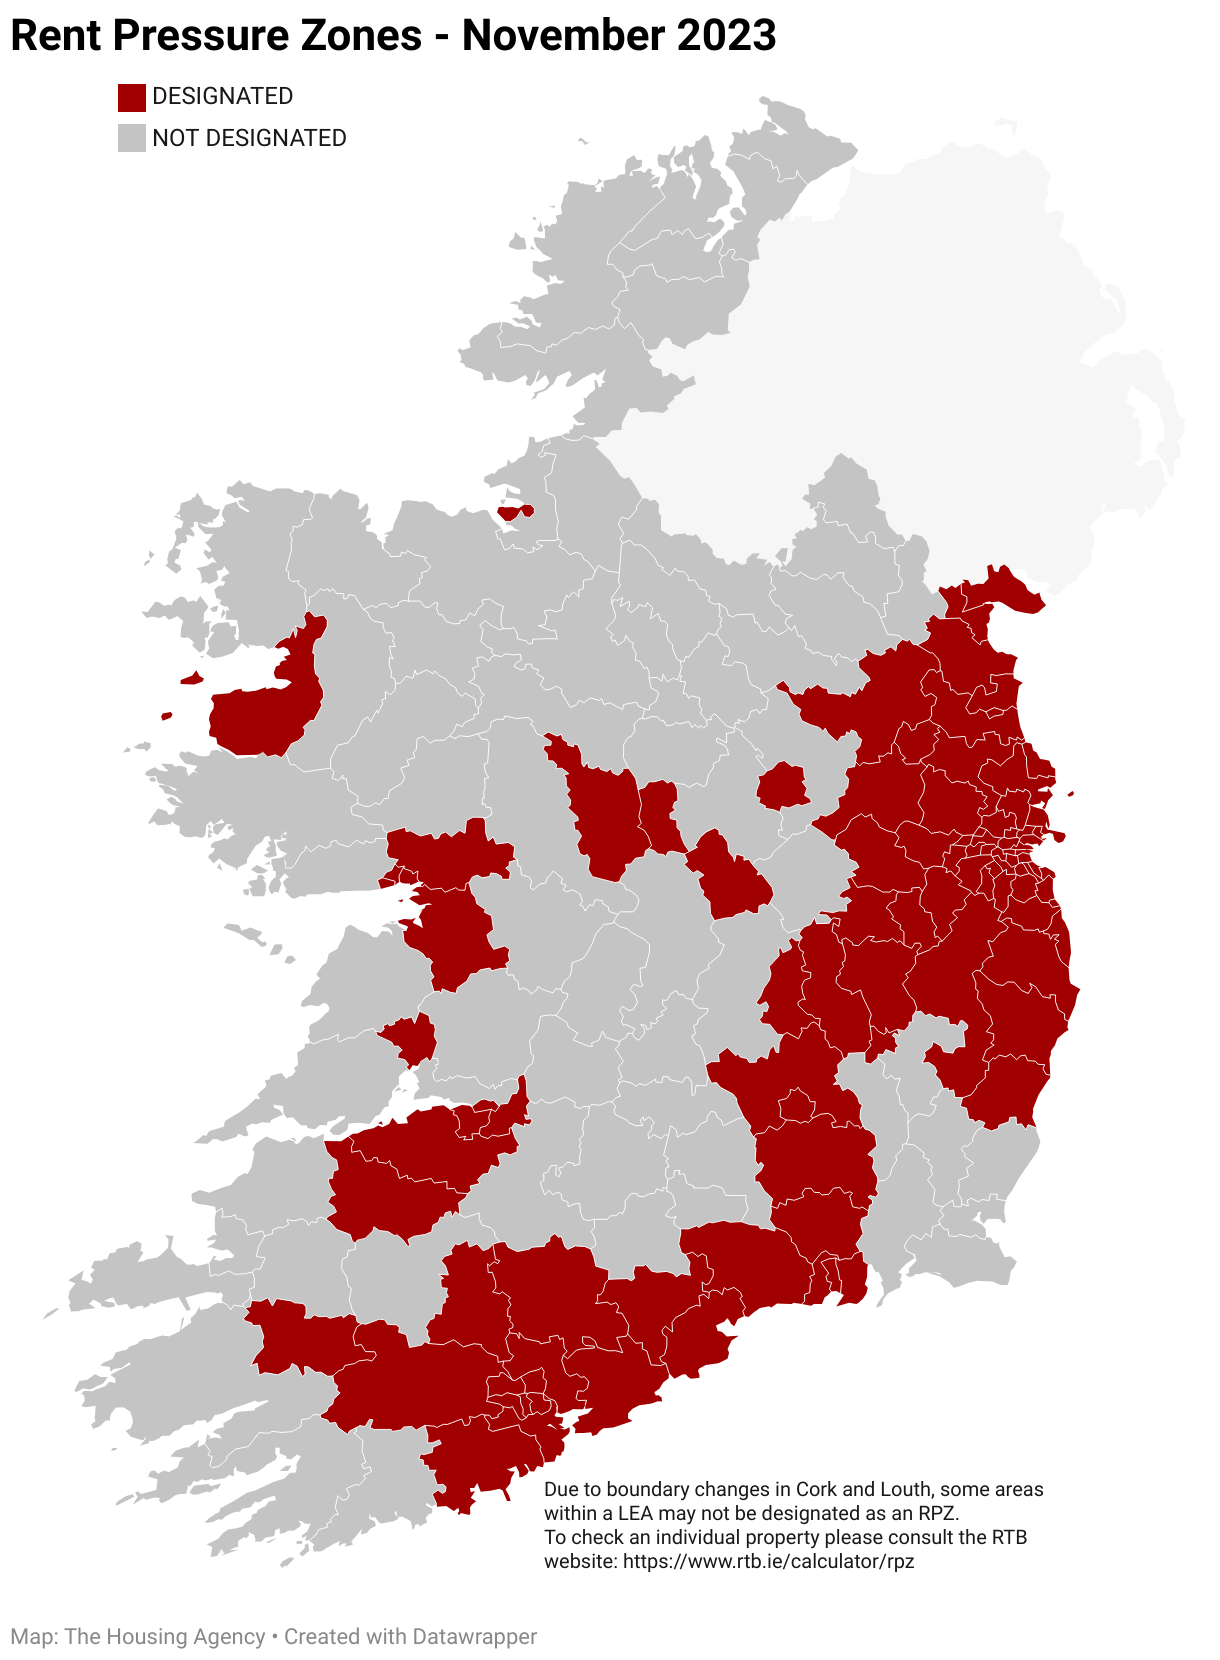 Map of Local Electoral Areas in Ireland showing which are designated as a Rent Pressure Zone in red and those which are not in grey. 